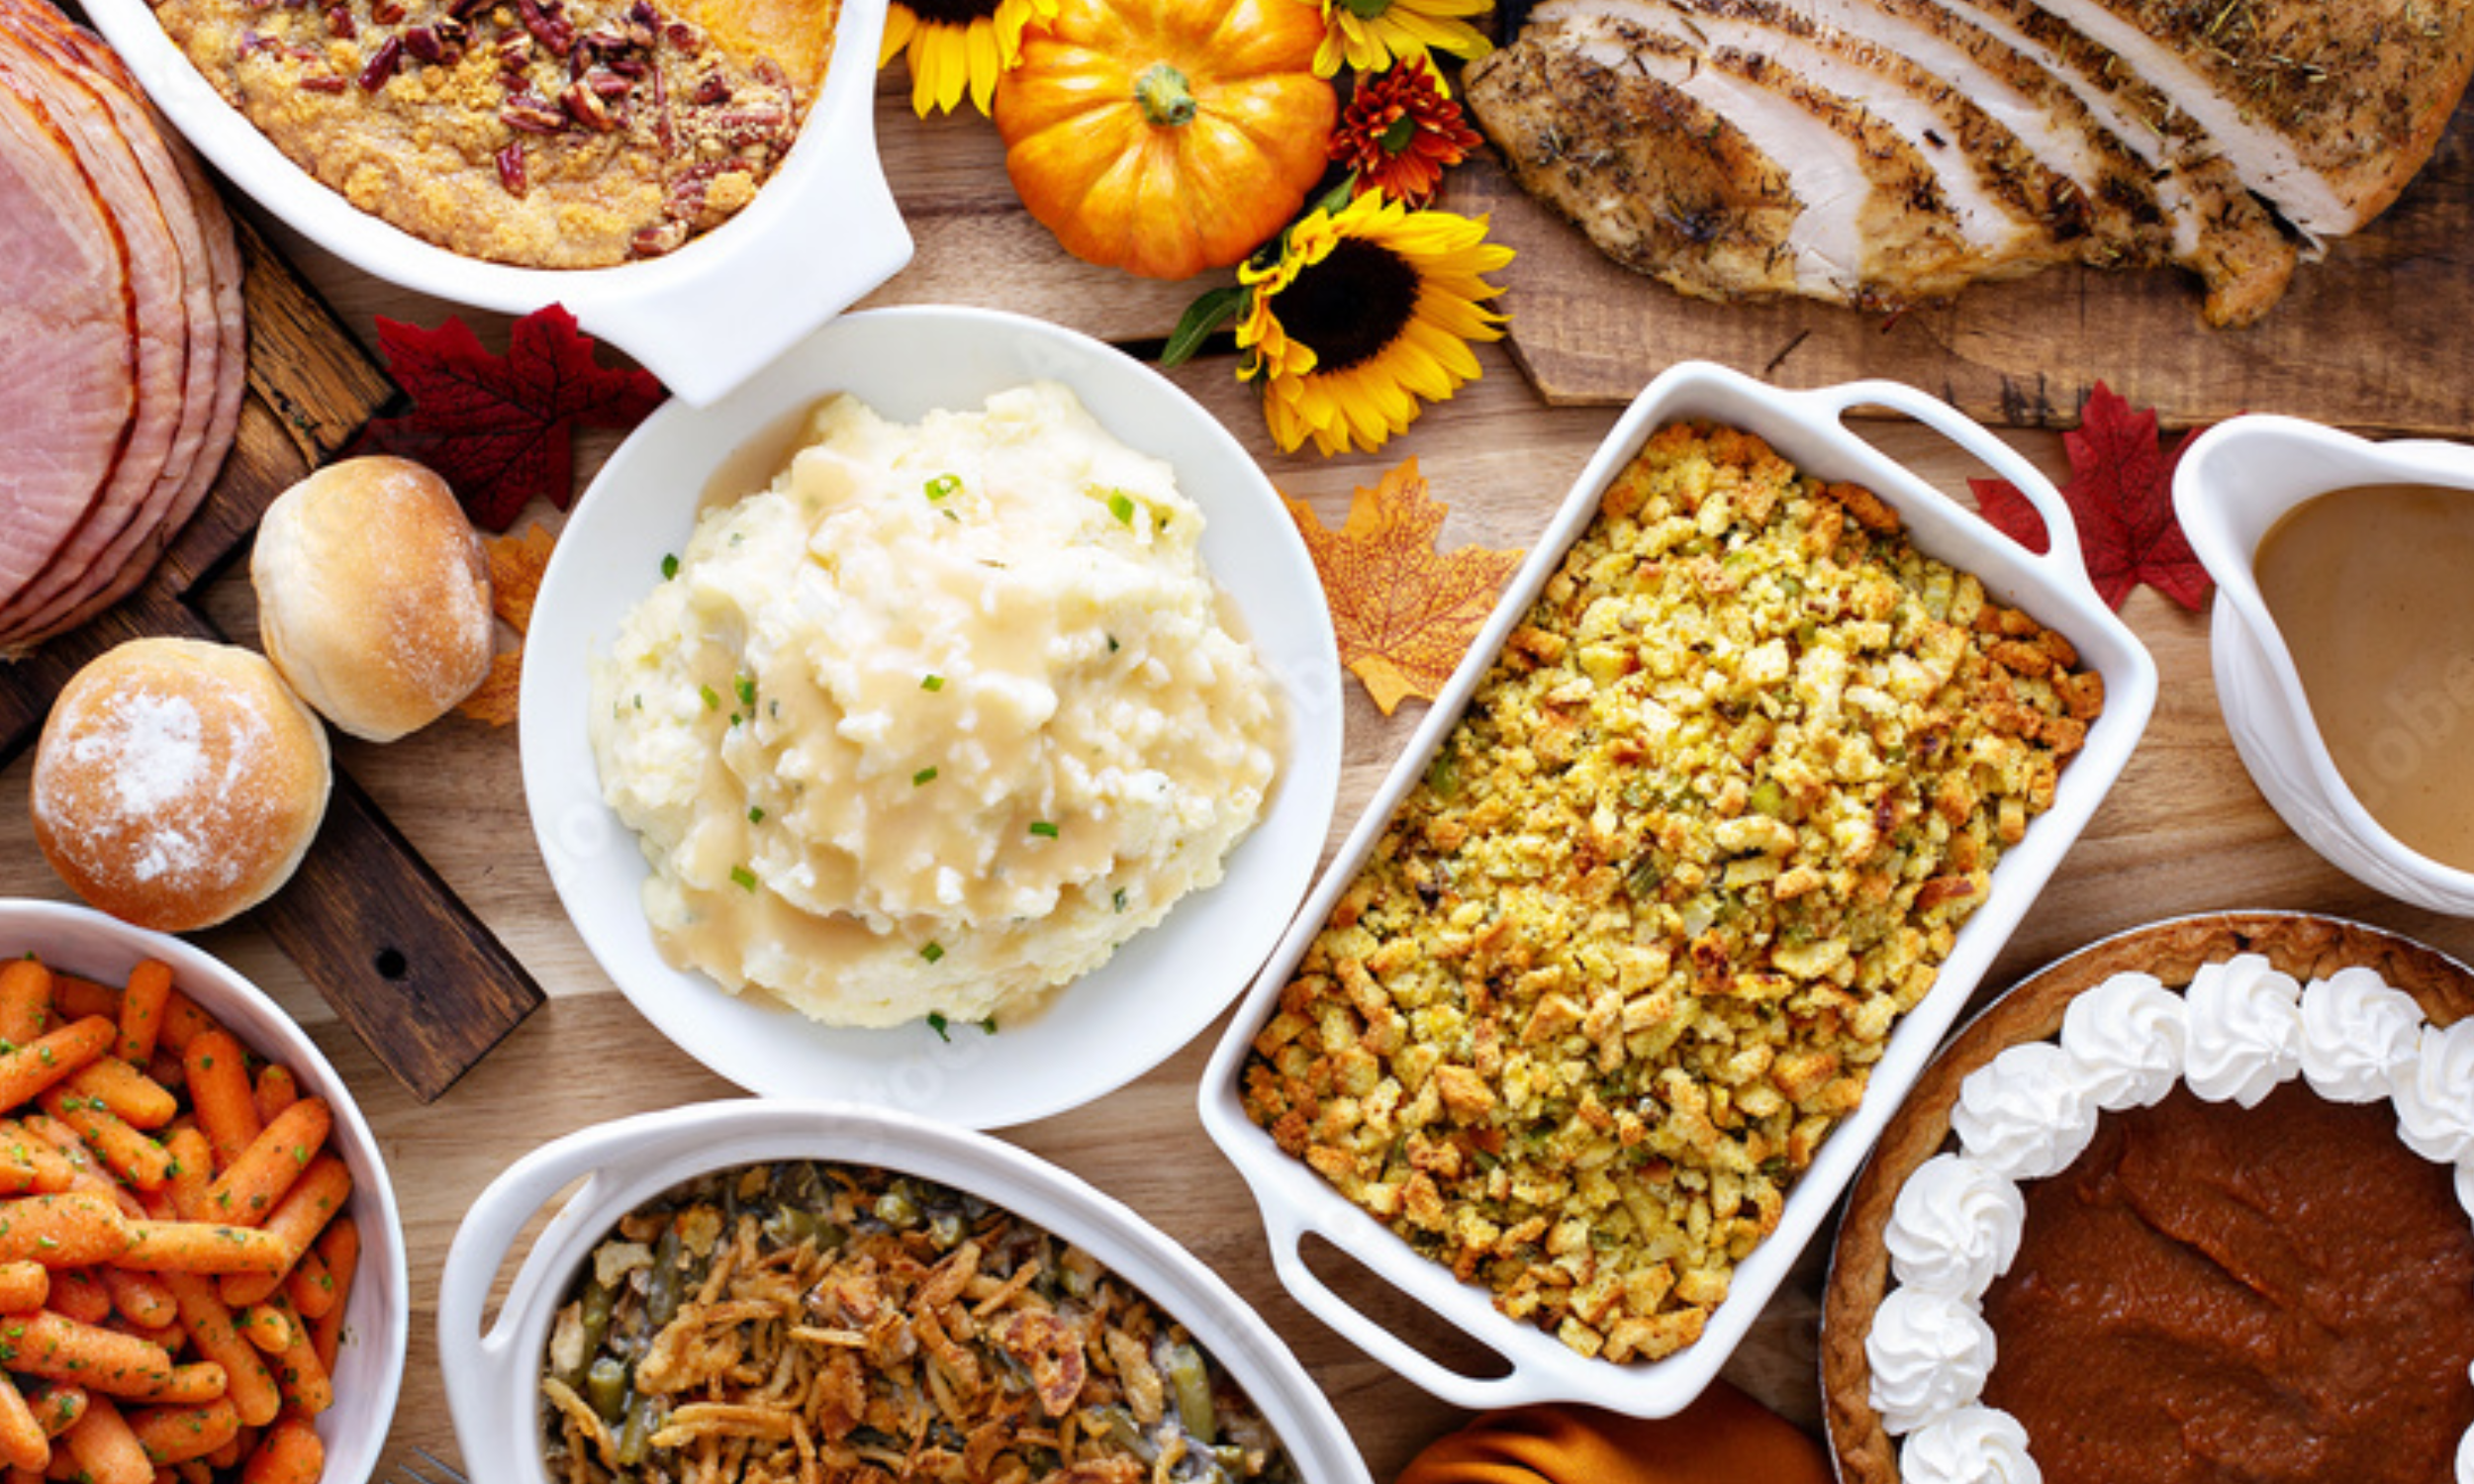 Celebrate Thanksgiving with Turkey…and Leftovers